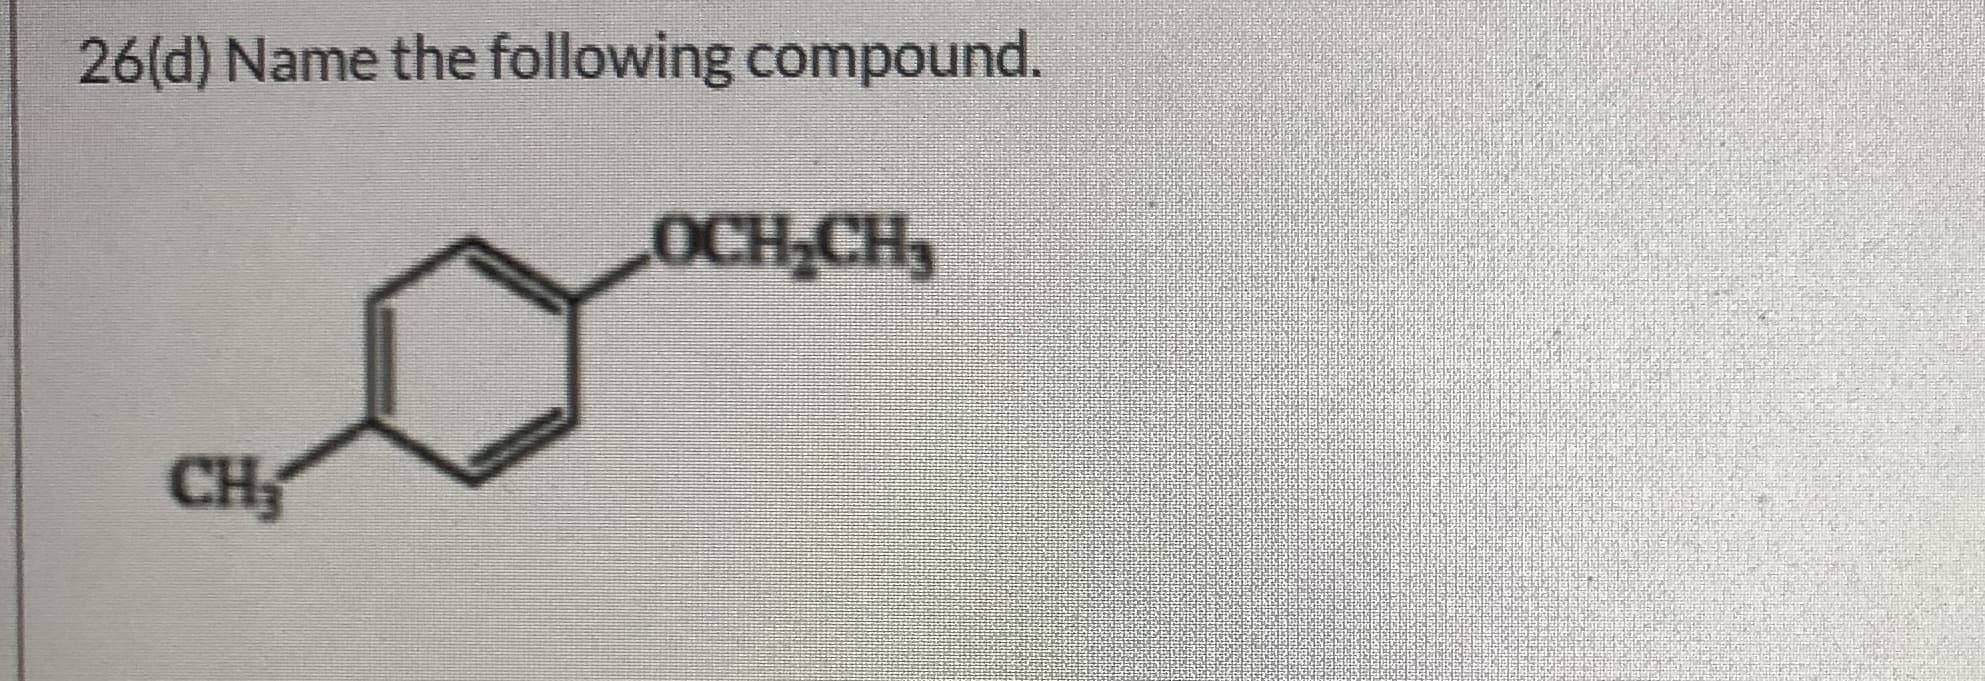 26(d) Name the following compound.
OCH,CH
CH
